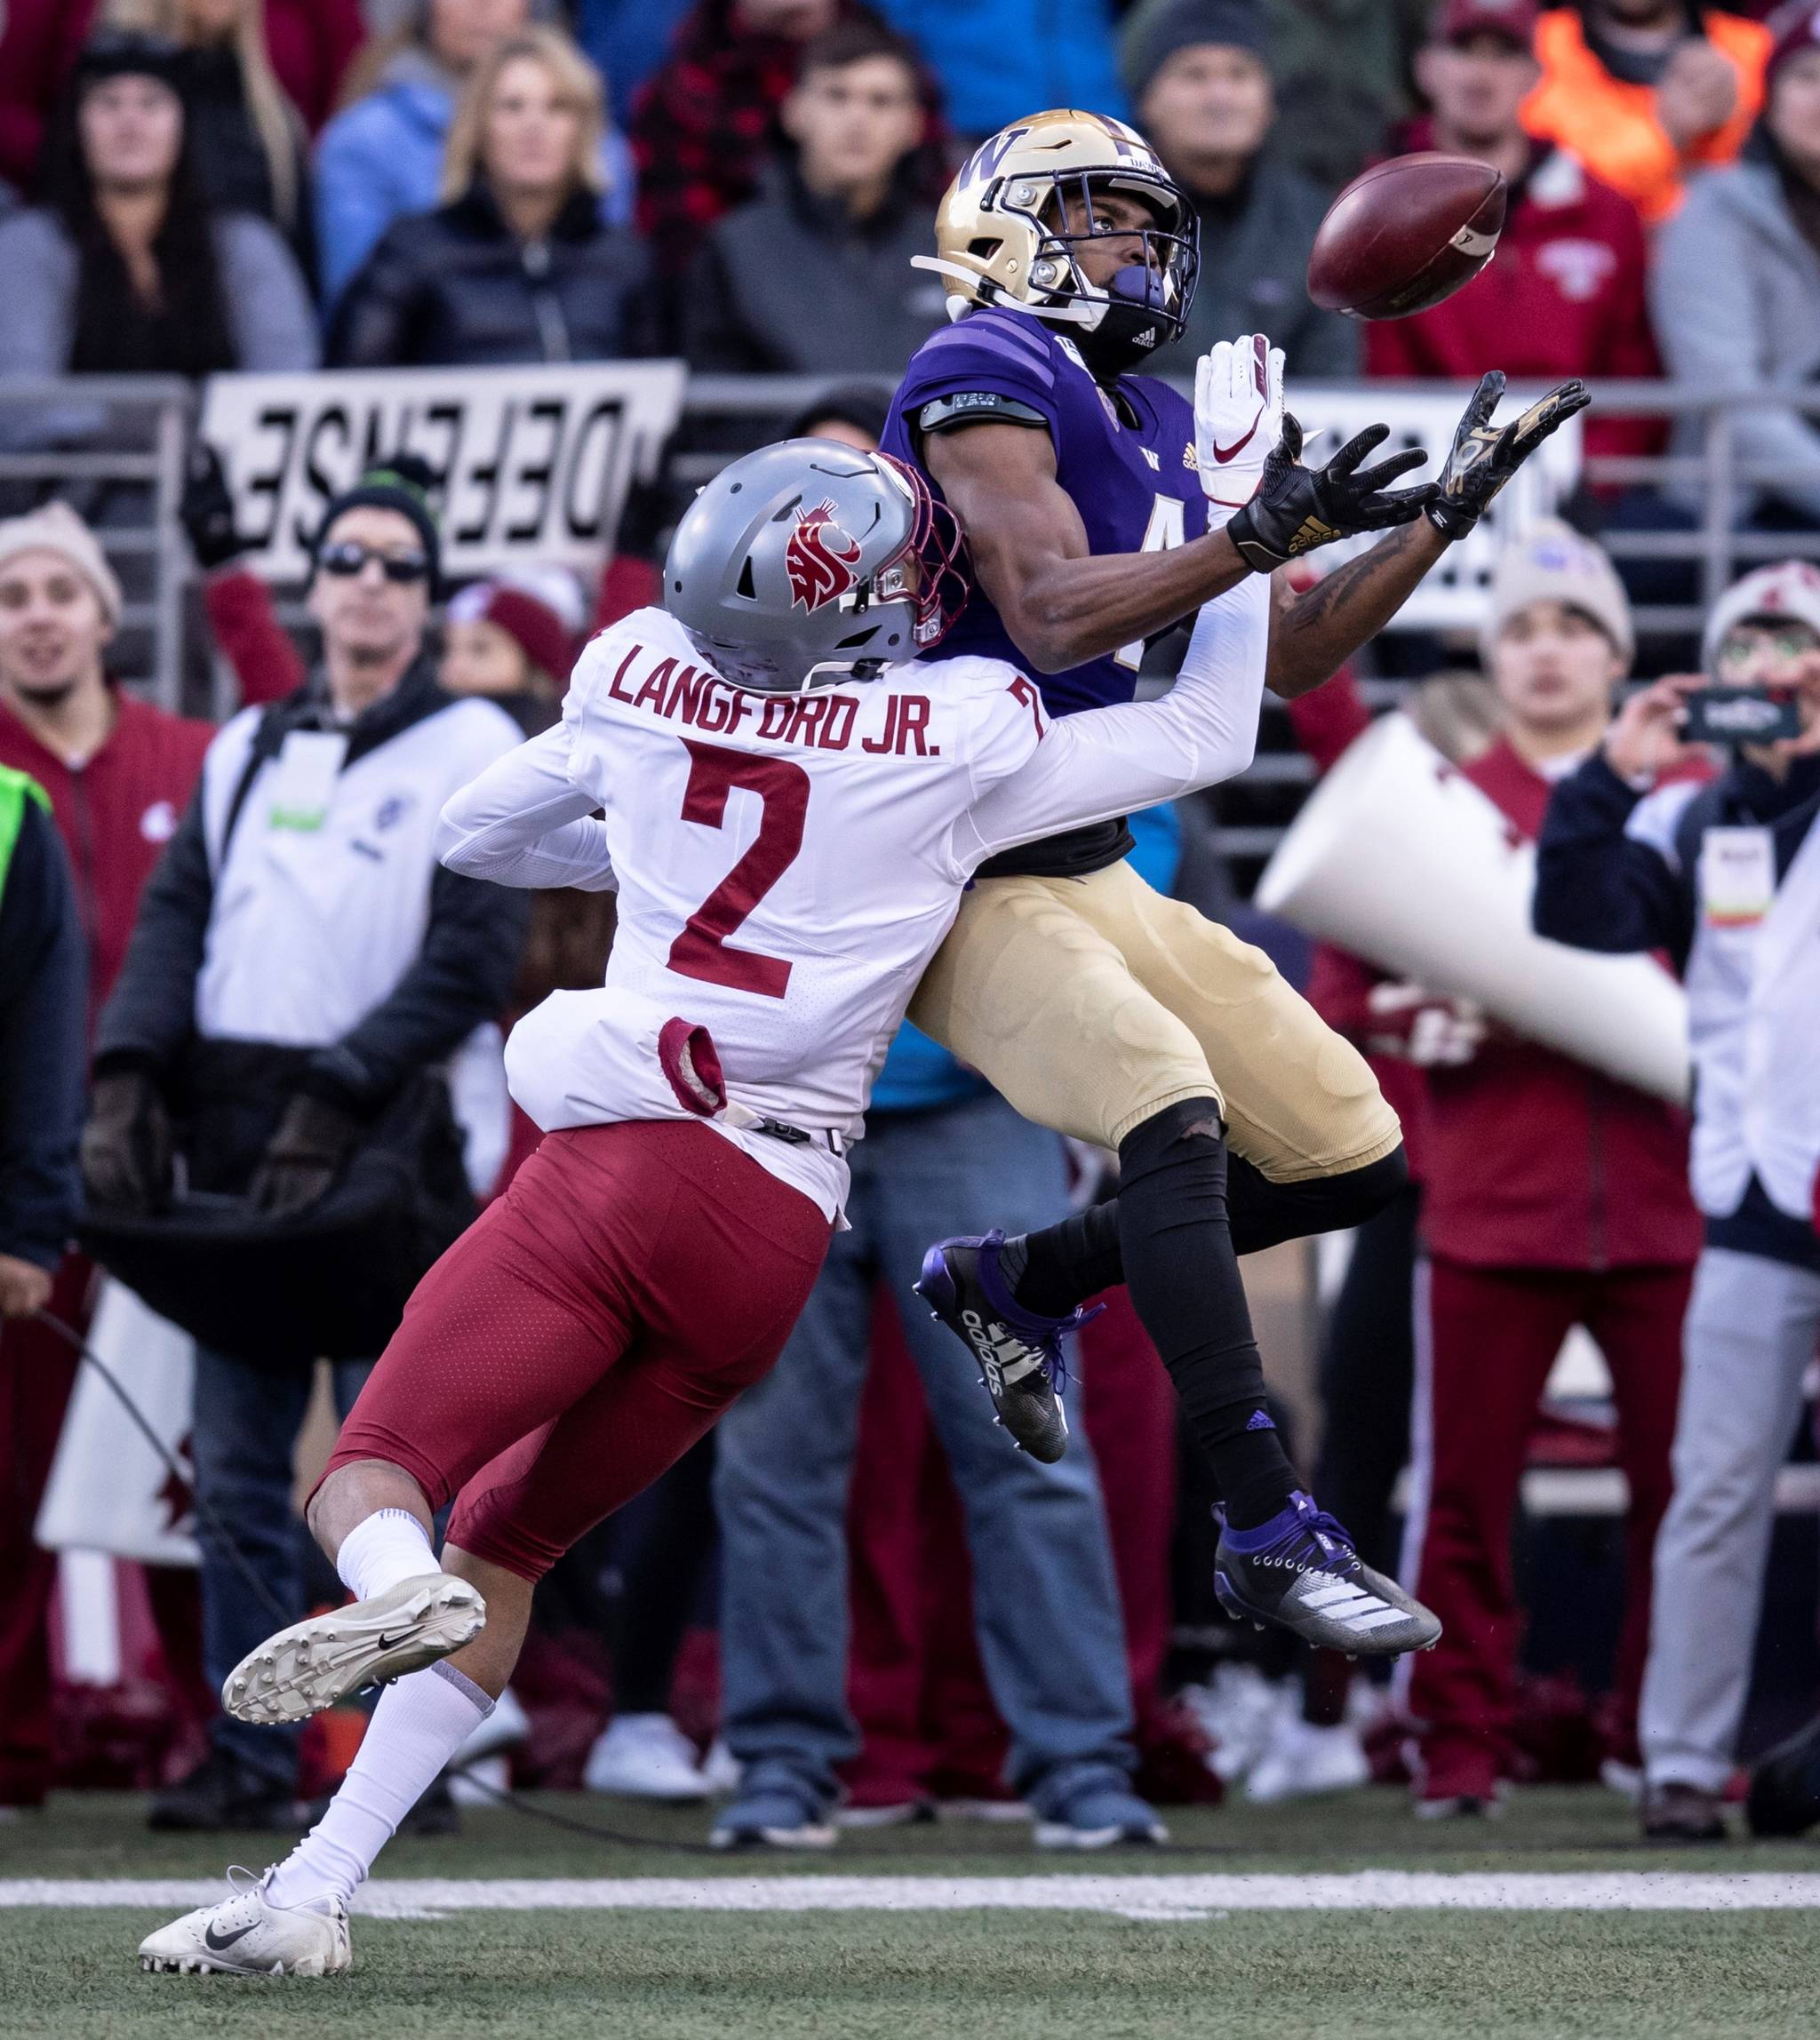 Washington State cornerback Derrick Langford, left, breaks up a pass intended for Washington wide receiver Terrell Bynum during the first half of an NCAA college football game, on Friday, Nov. 29, 2019 in Seattle. (AP Photo/Stephen Brashear)